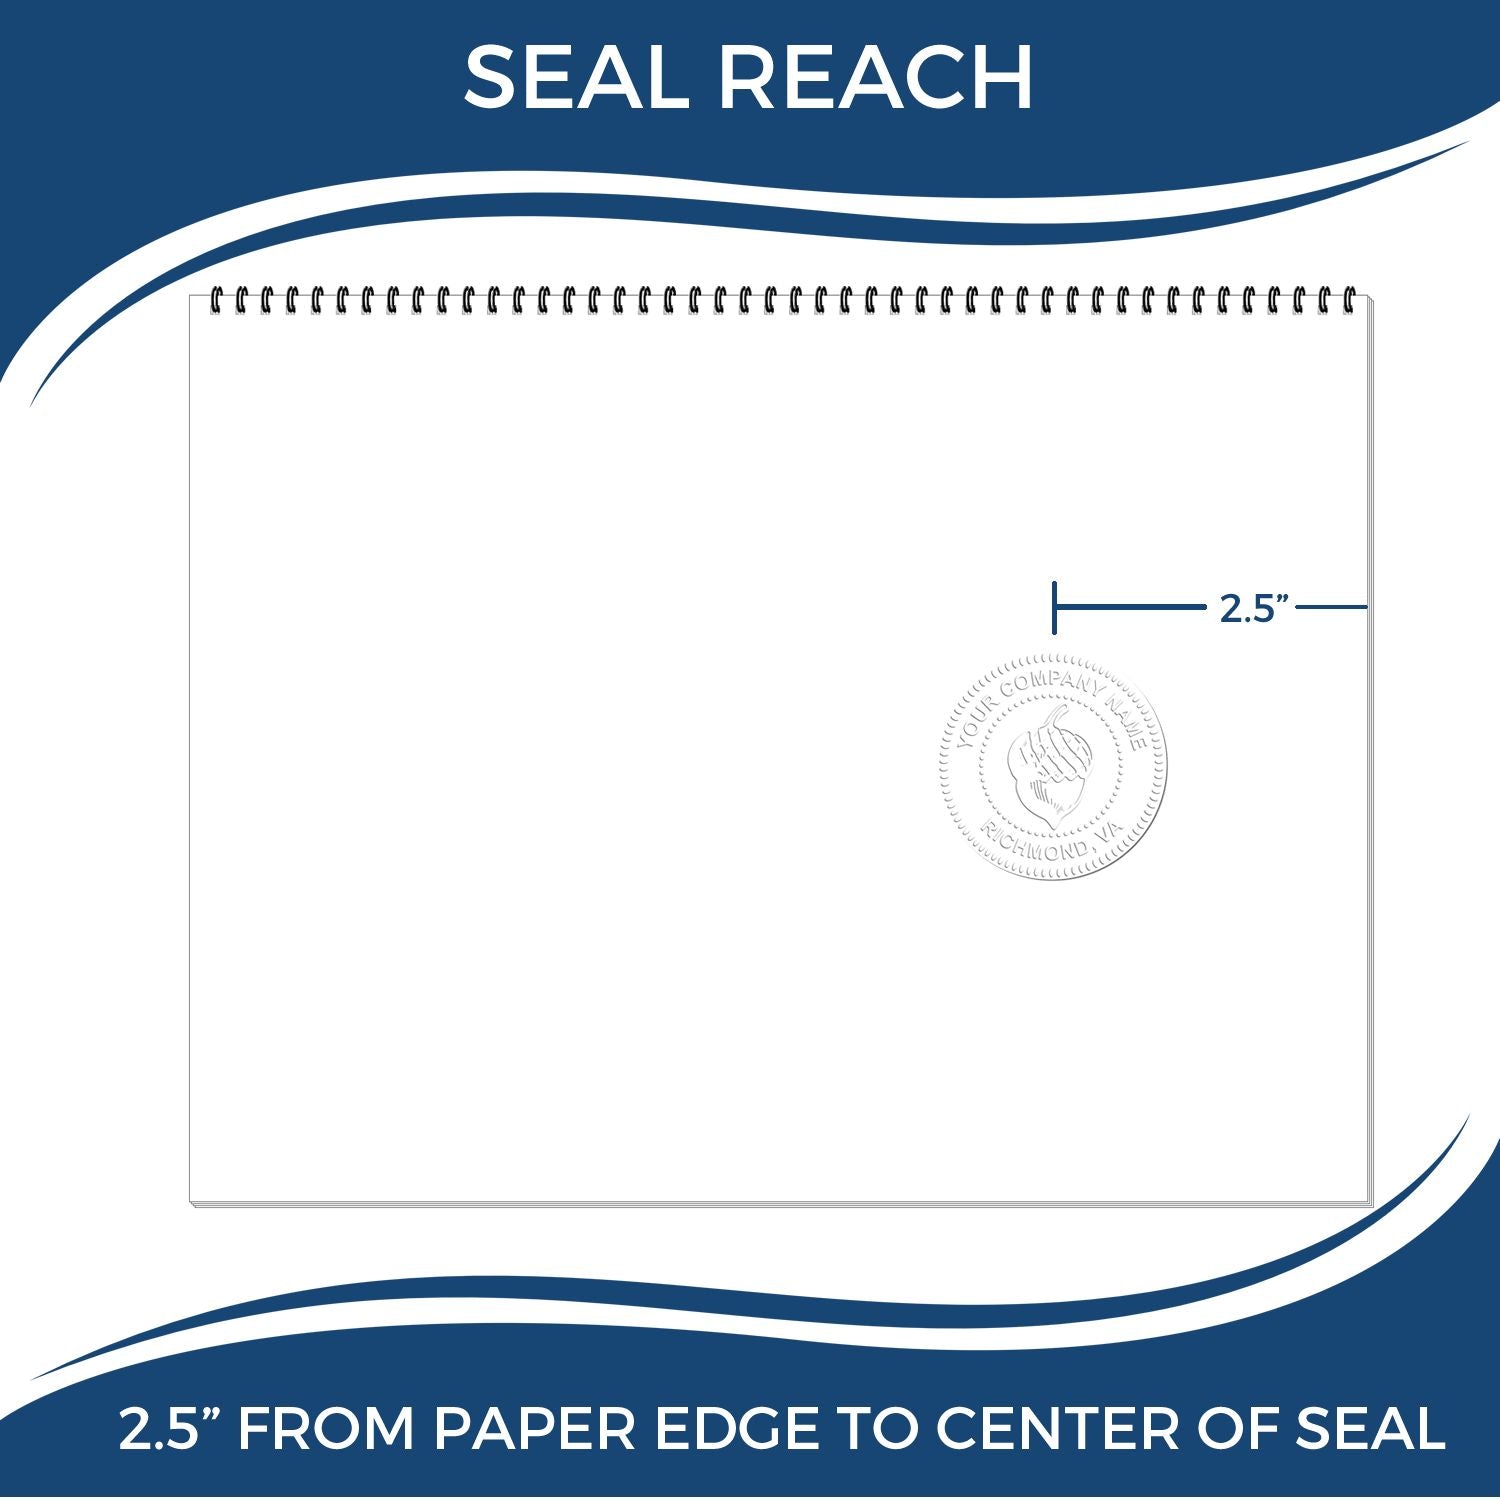 An infographic showing the seal reach which is represented by a ruler and a miniature seal image of the Long Reach North Dakota Geology Seal